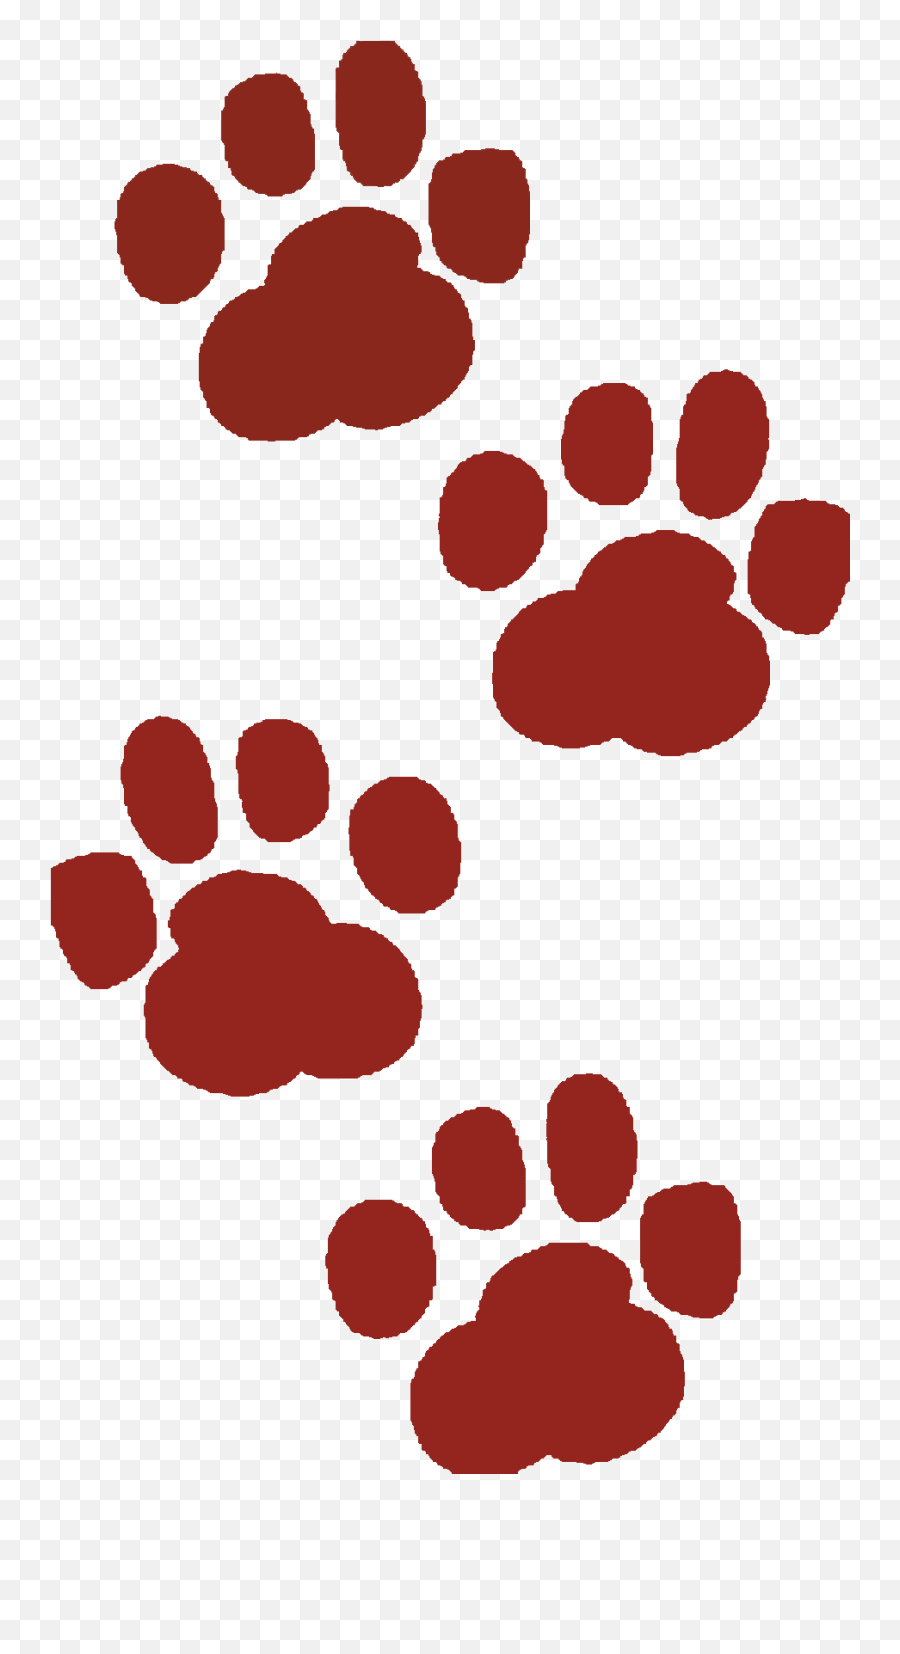 Canine Craze A High Performance Yet Personal Dog School - Cat Foot Emoji,Paw Emoticon Meaning